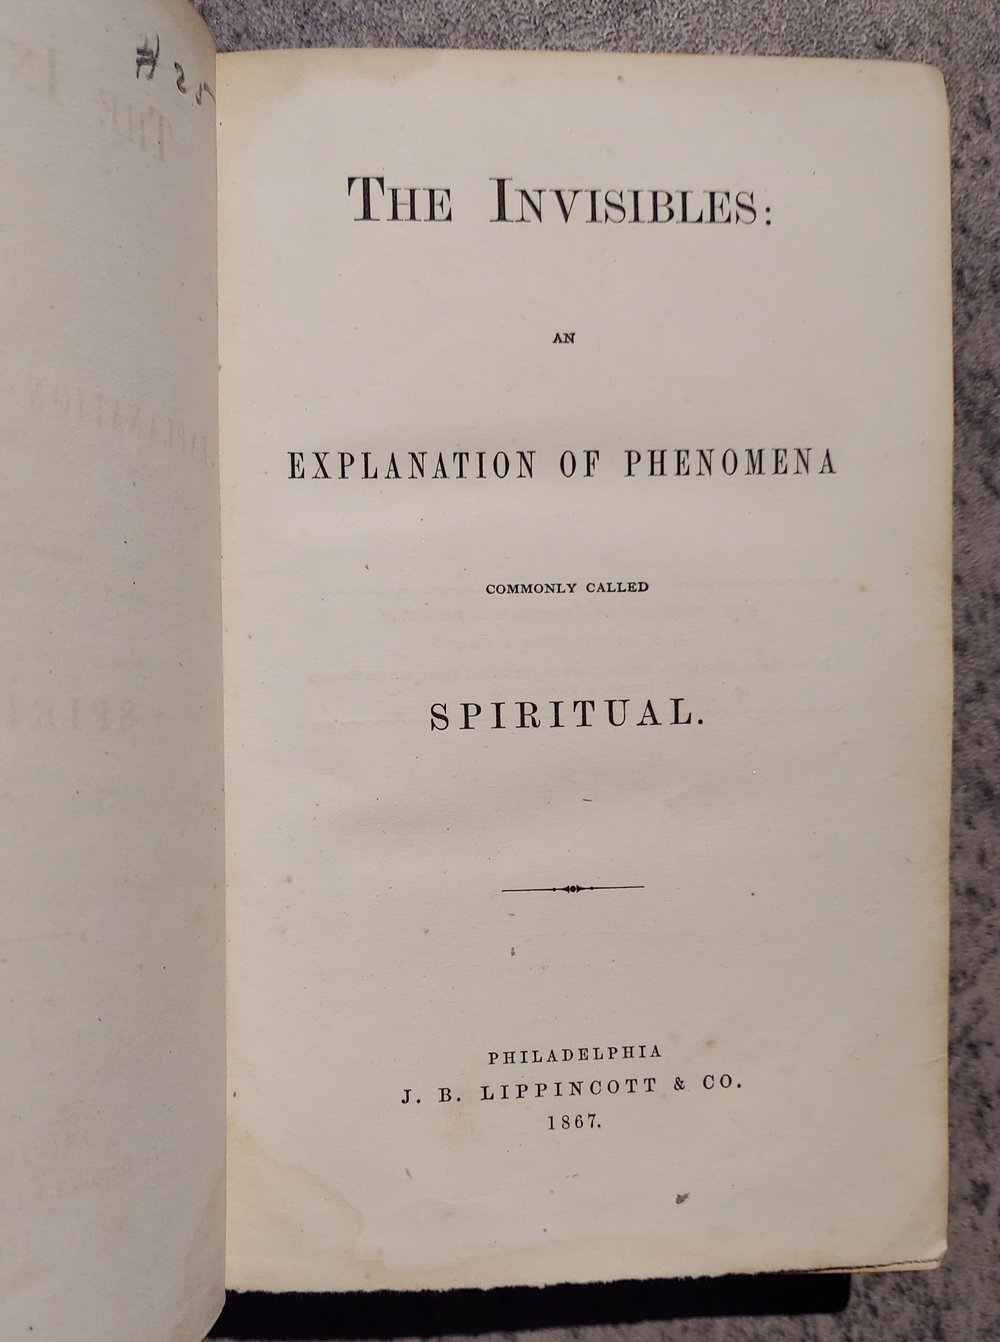 The Invisibles: An Explanation of Phenomena Commonly Called Spiritual, by M. J. Williamson (1867)